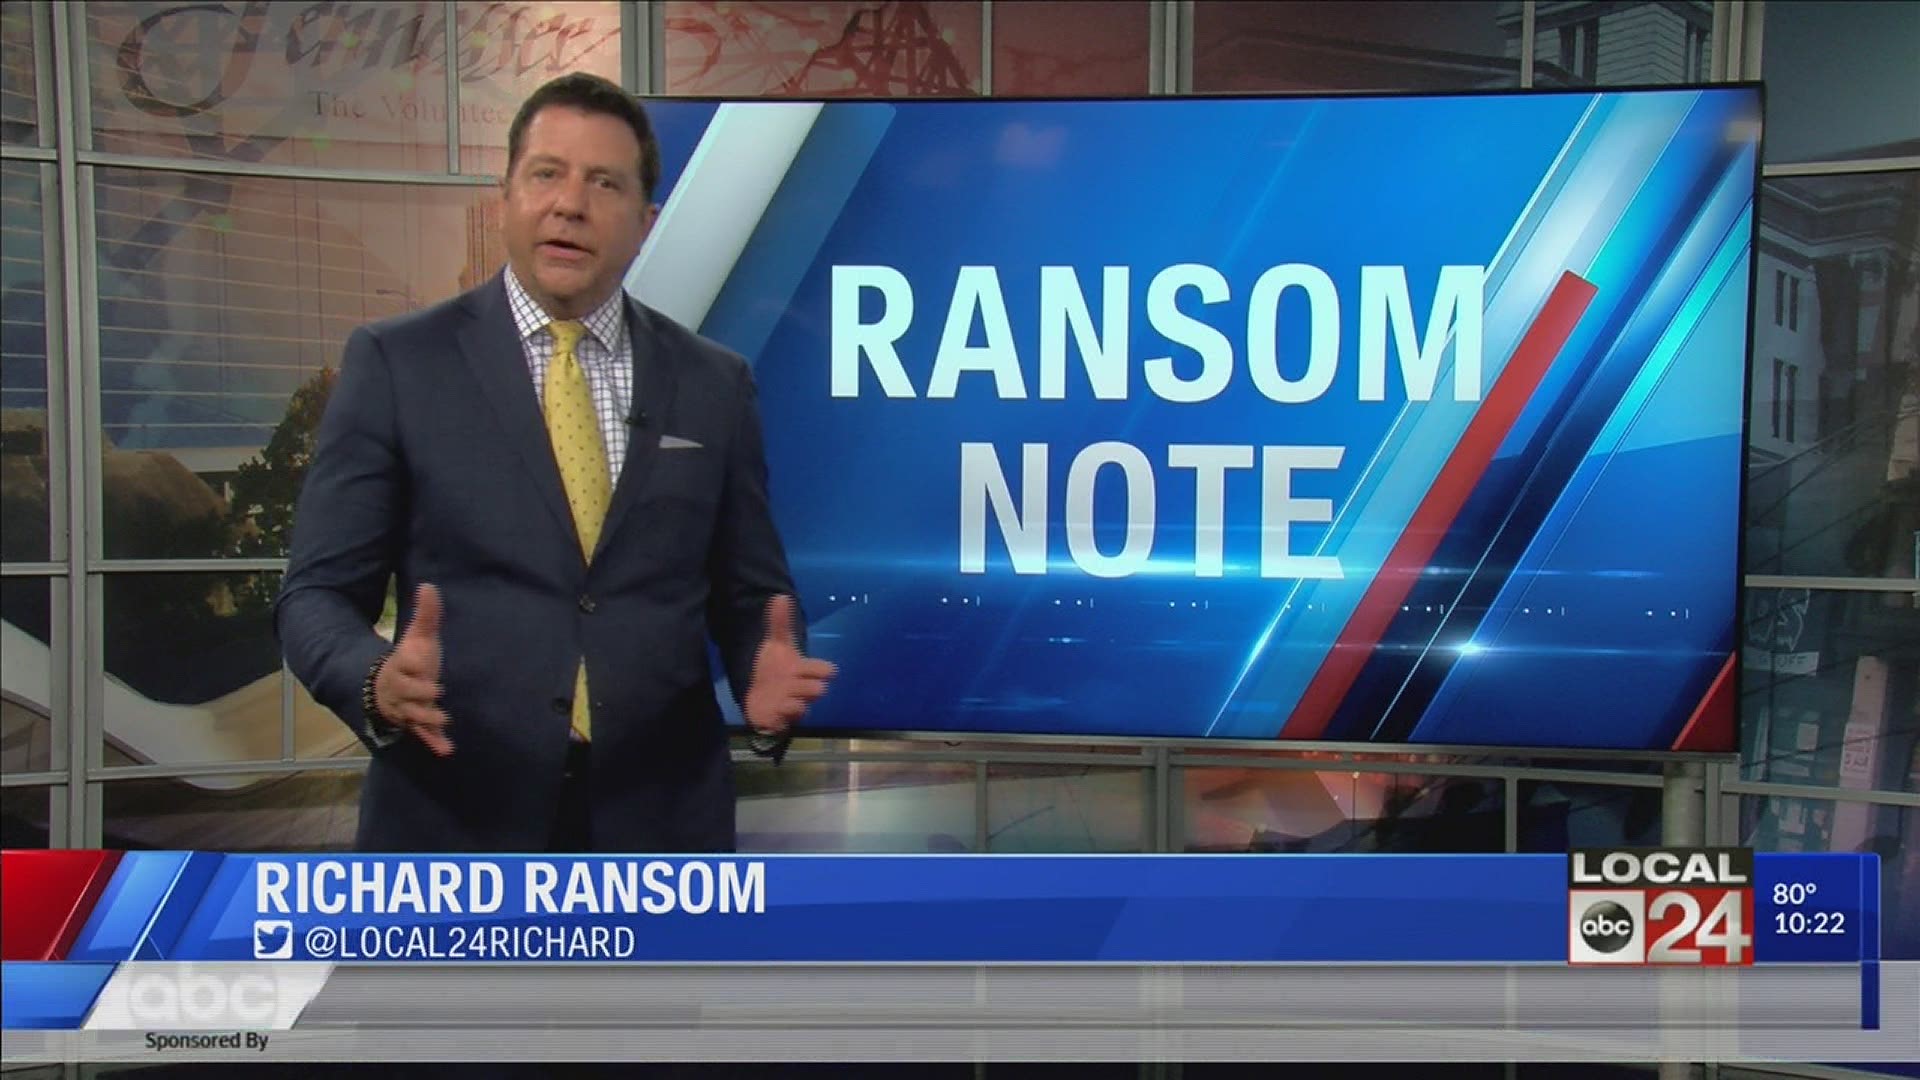 Local 24 News Anchor Richard Ransom looks at the latest development in the project in his Ransom Note.